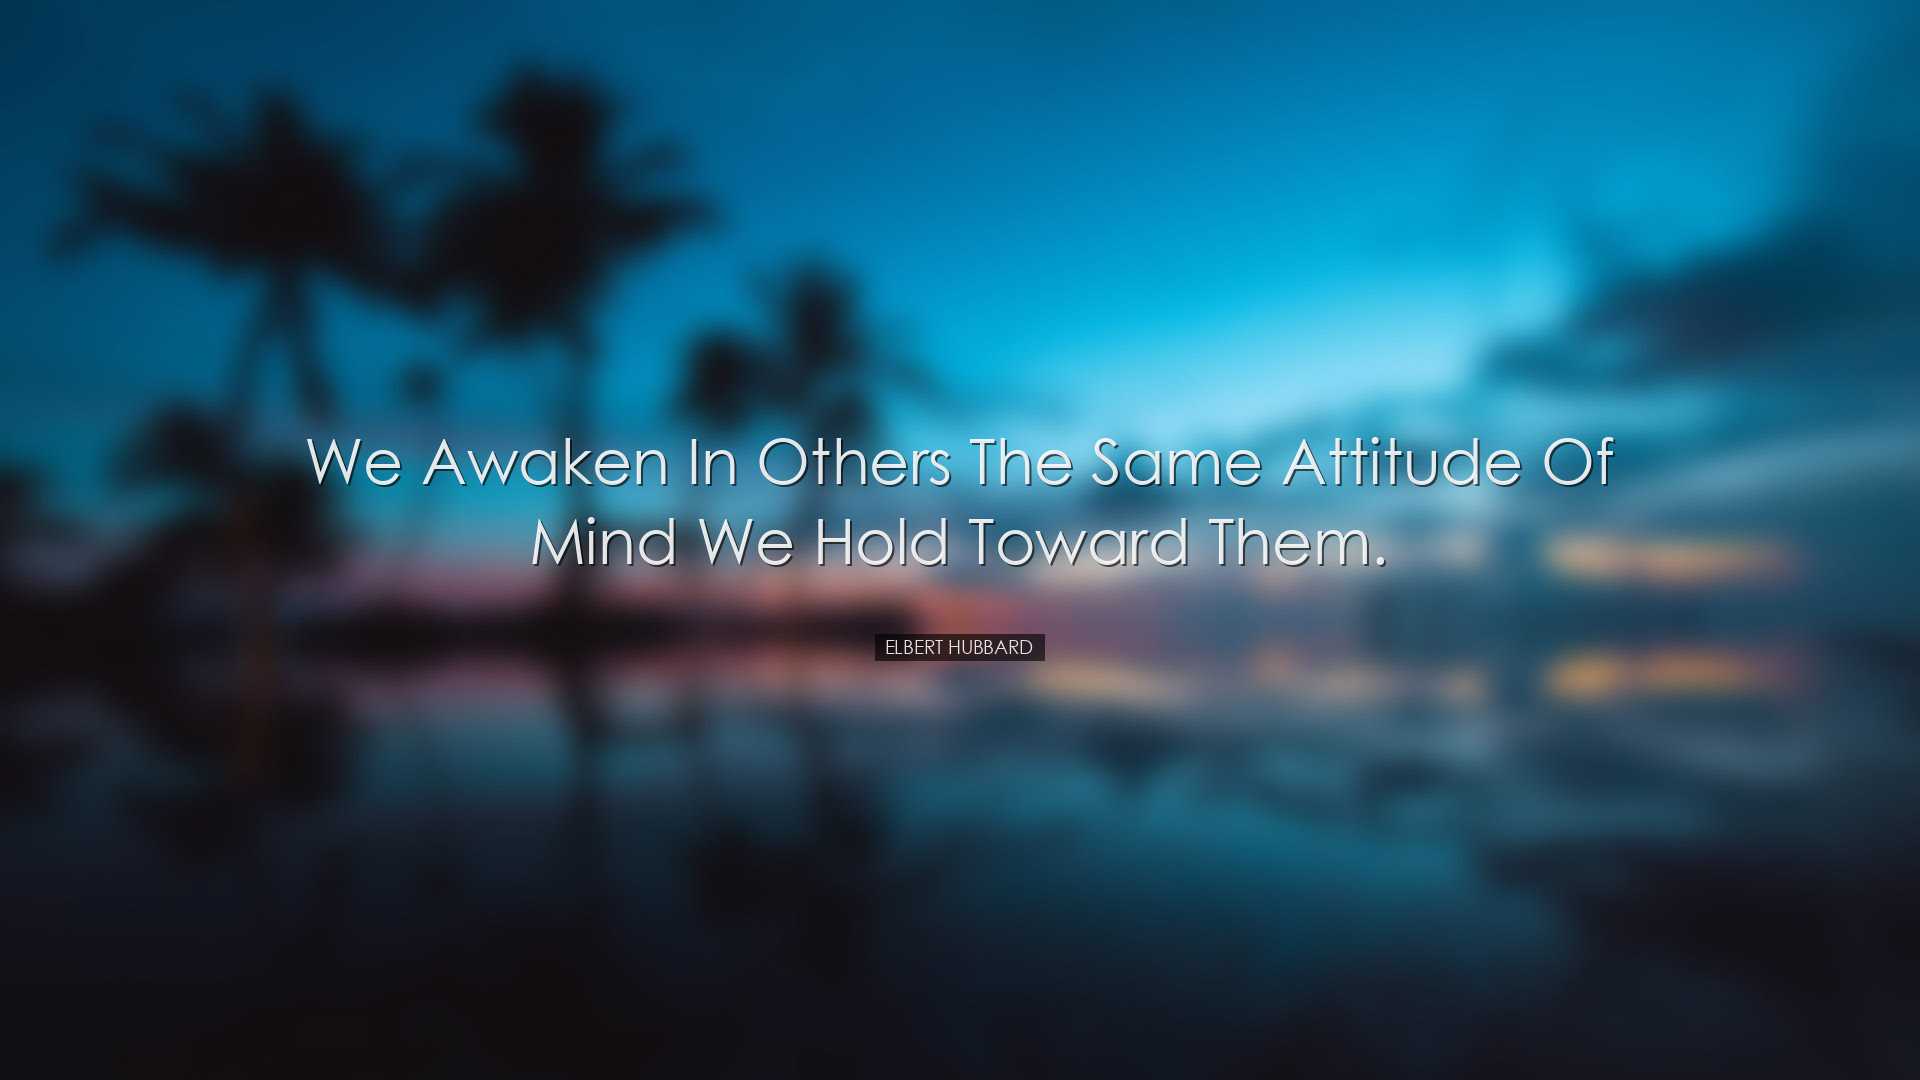 We awaken in others the same attitude of mind we hold toward them.